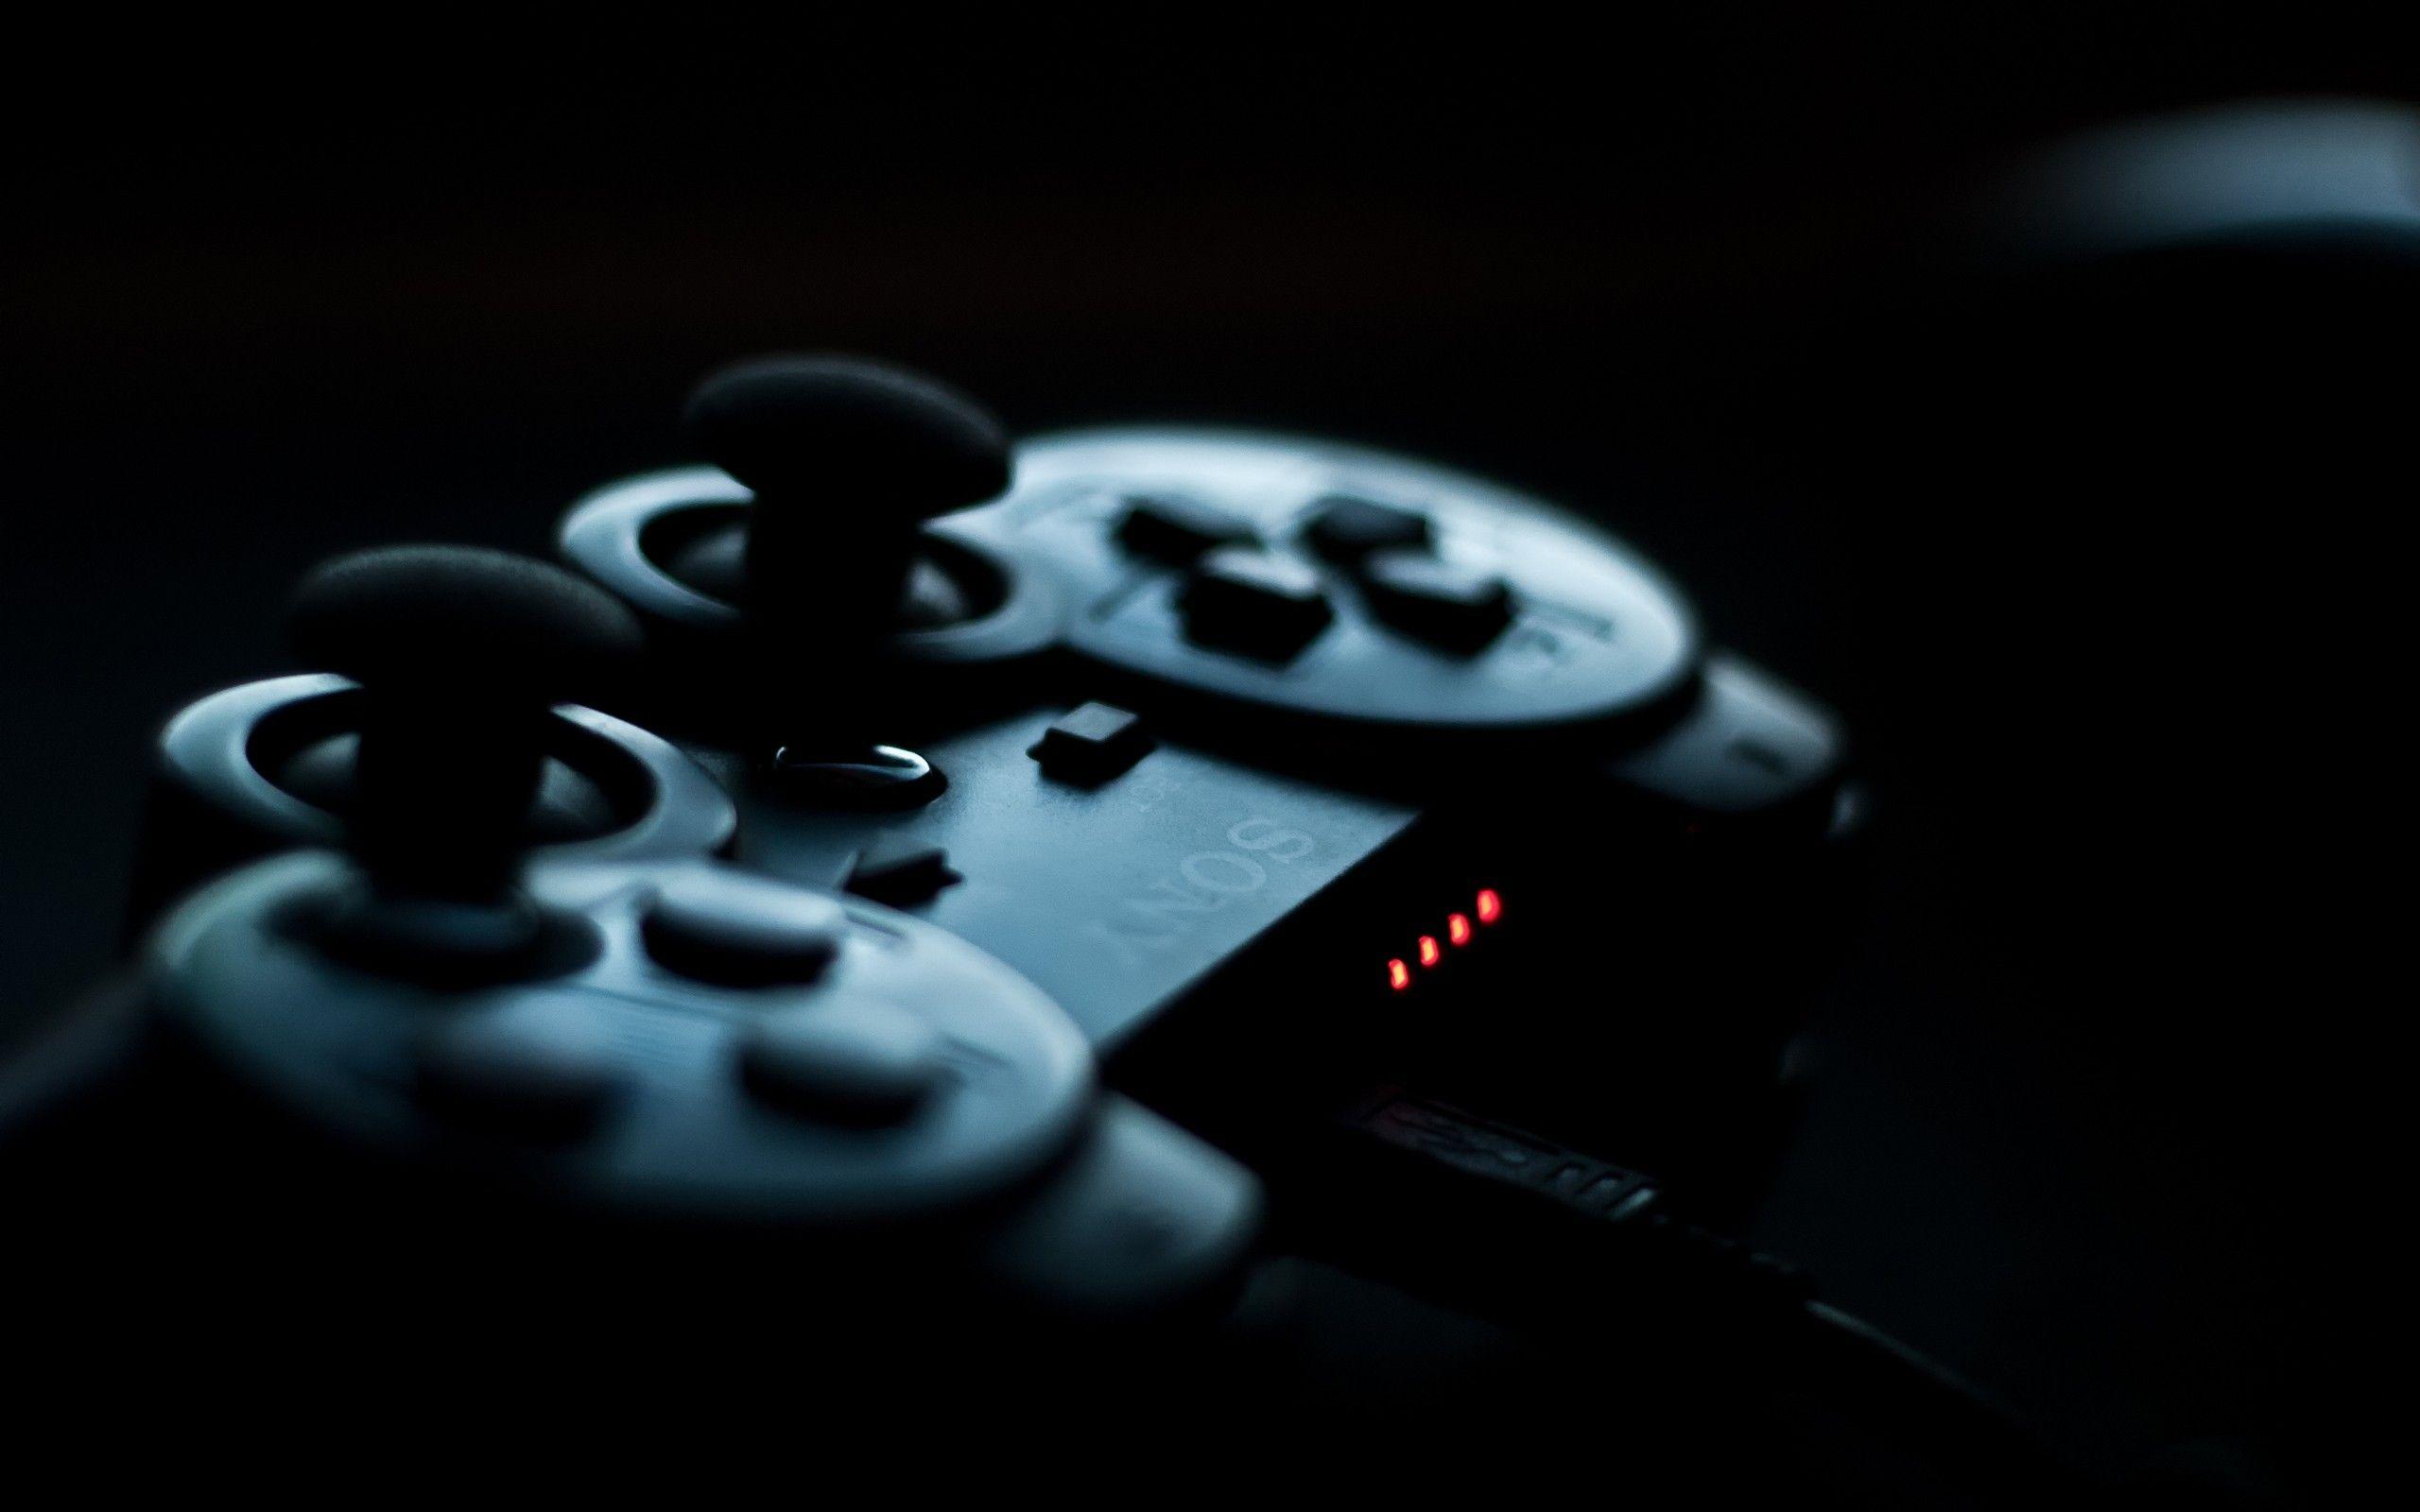 HD Wallpaper For PS3